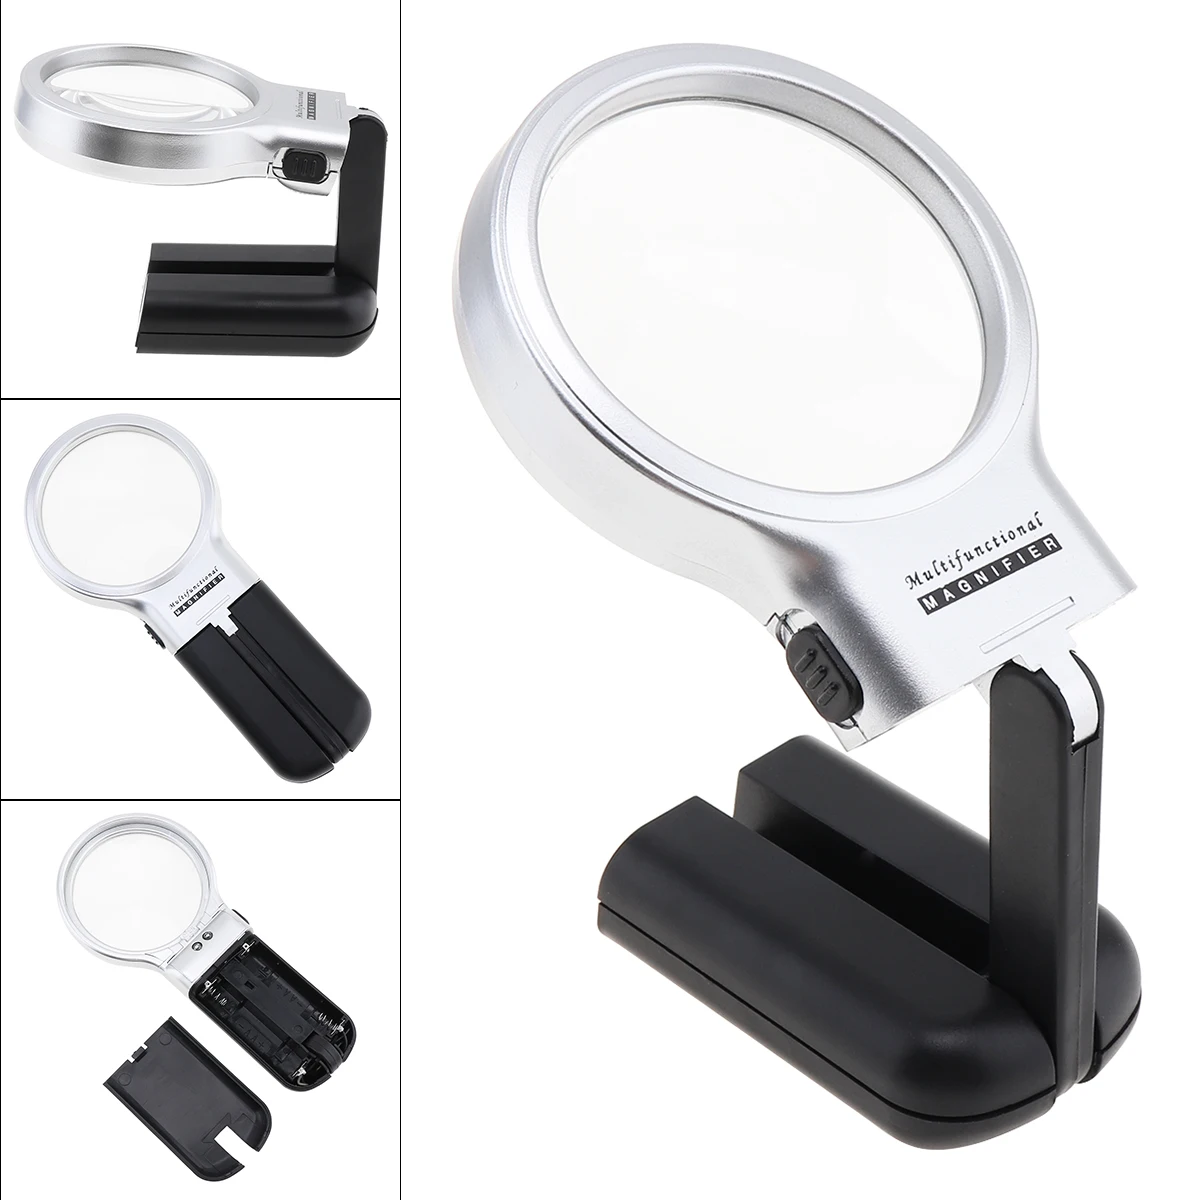 

3X Multifunctional Magnifier 62mm Adjustable Angle Plastic Optical Glass Magnifiers with 2 LED Lights for Reading and Inspection